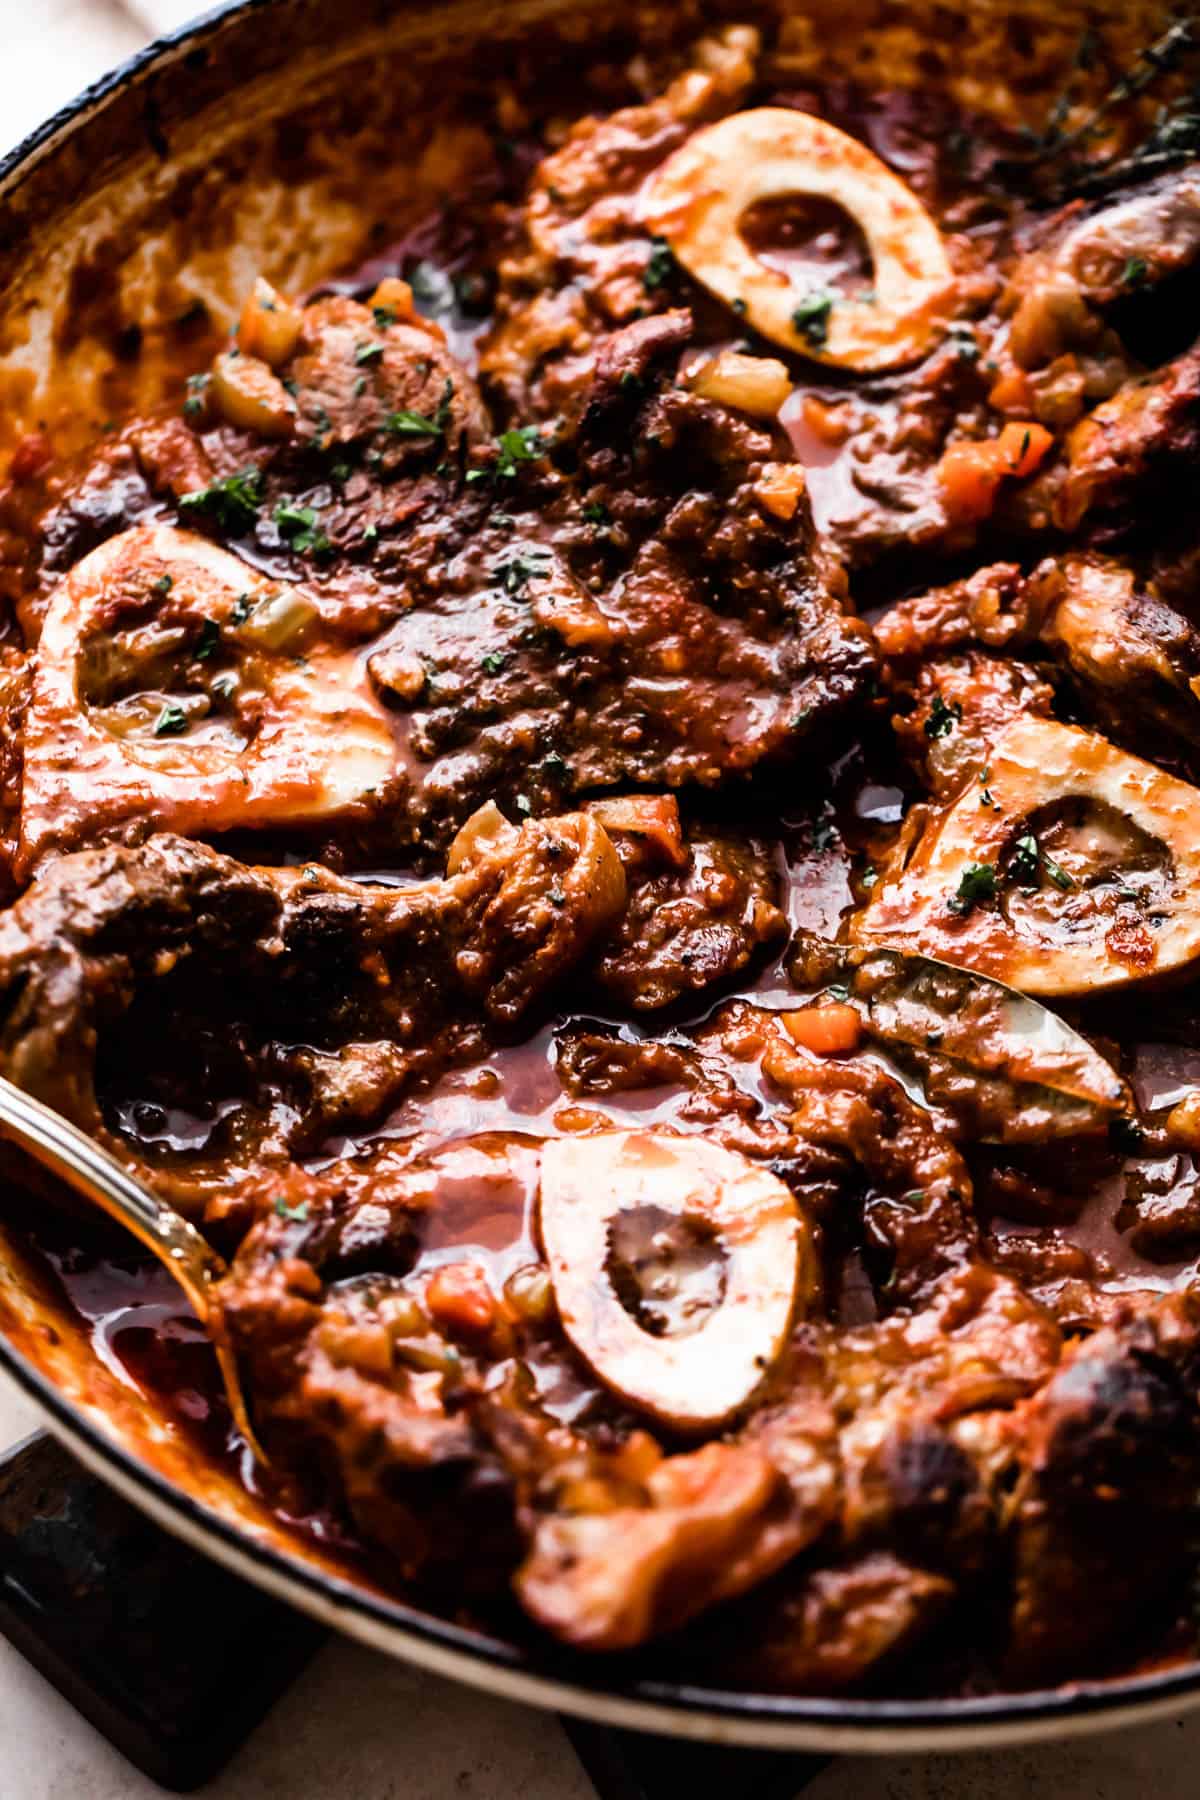 osso buco beef shanks cooked in a braiser.